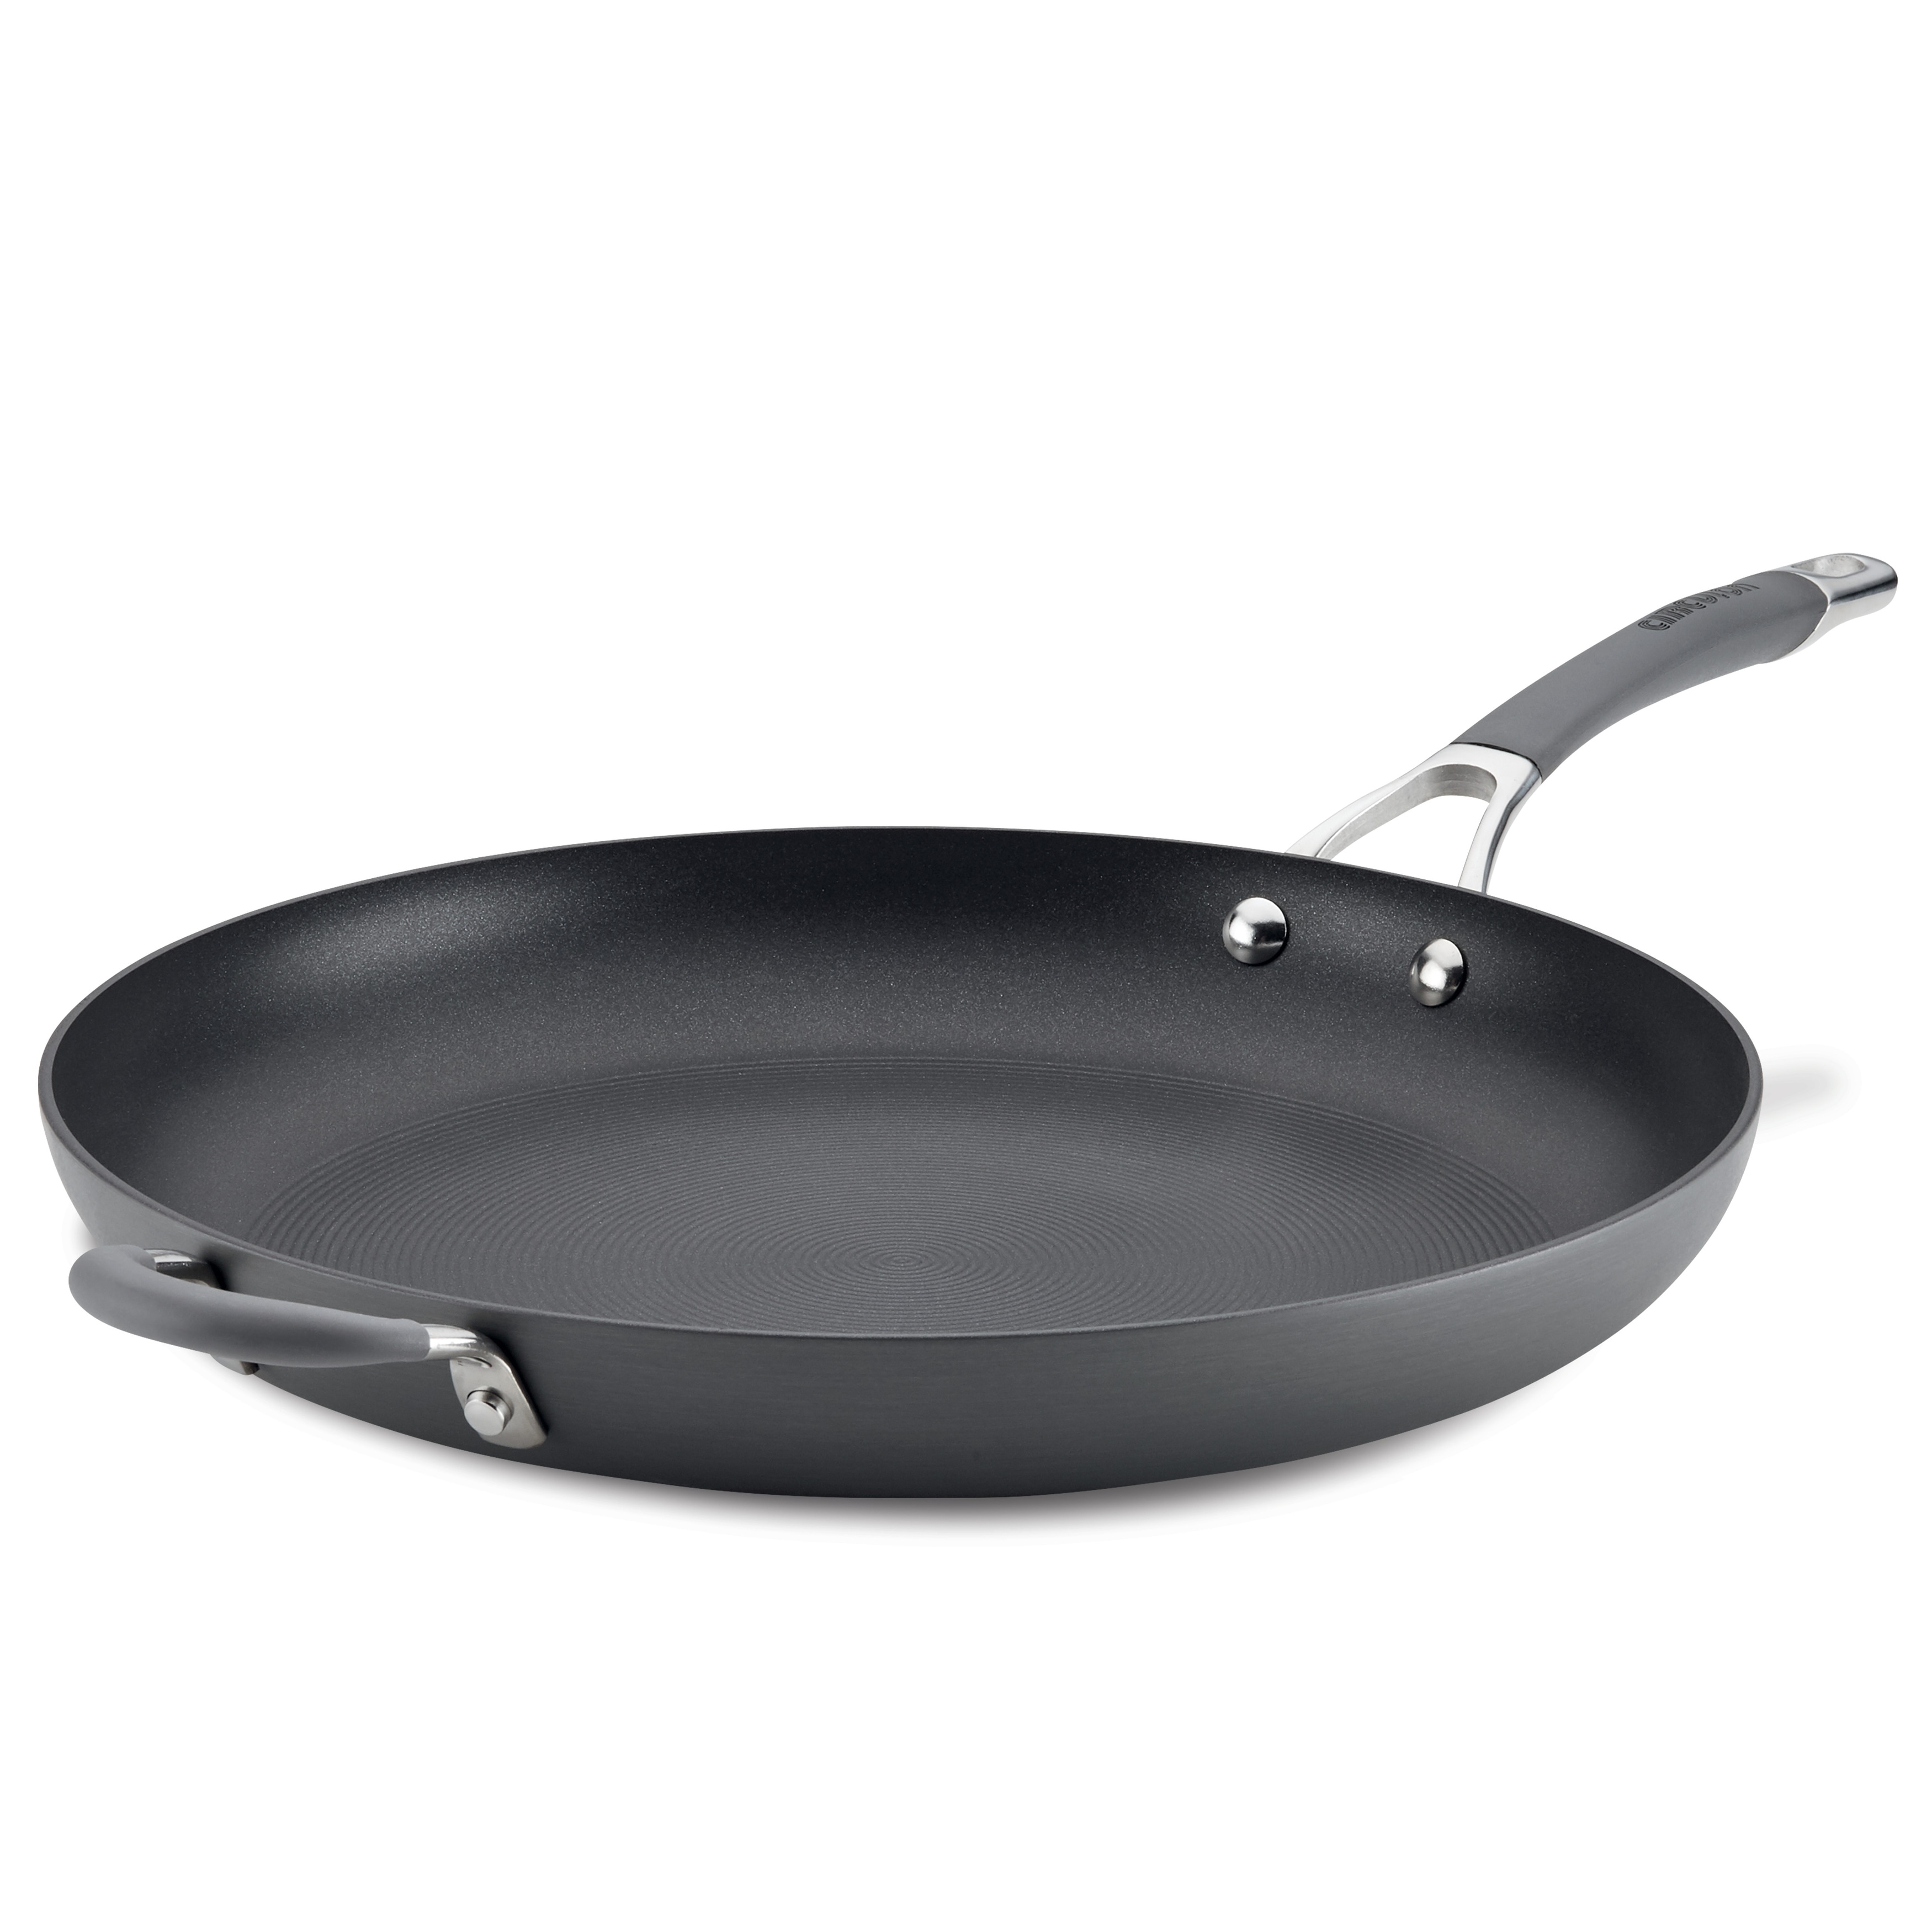 https://ak1.ostkcdn.com/images/products/is/images/direct/1709775cadac2af7070cf2536c7f5d0bc2569118/Circulon-Radiance-Hard-Anodized-Nonstick-Frying-Pan-with-Helper-Handle%2C-14-Inch%2C-Gray.jpg